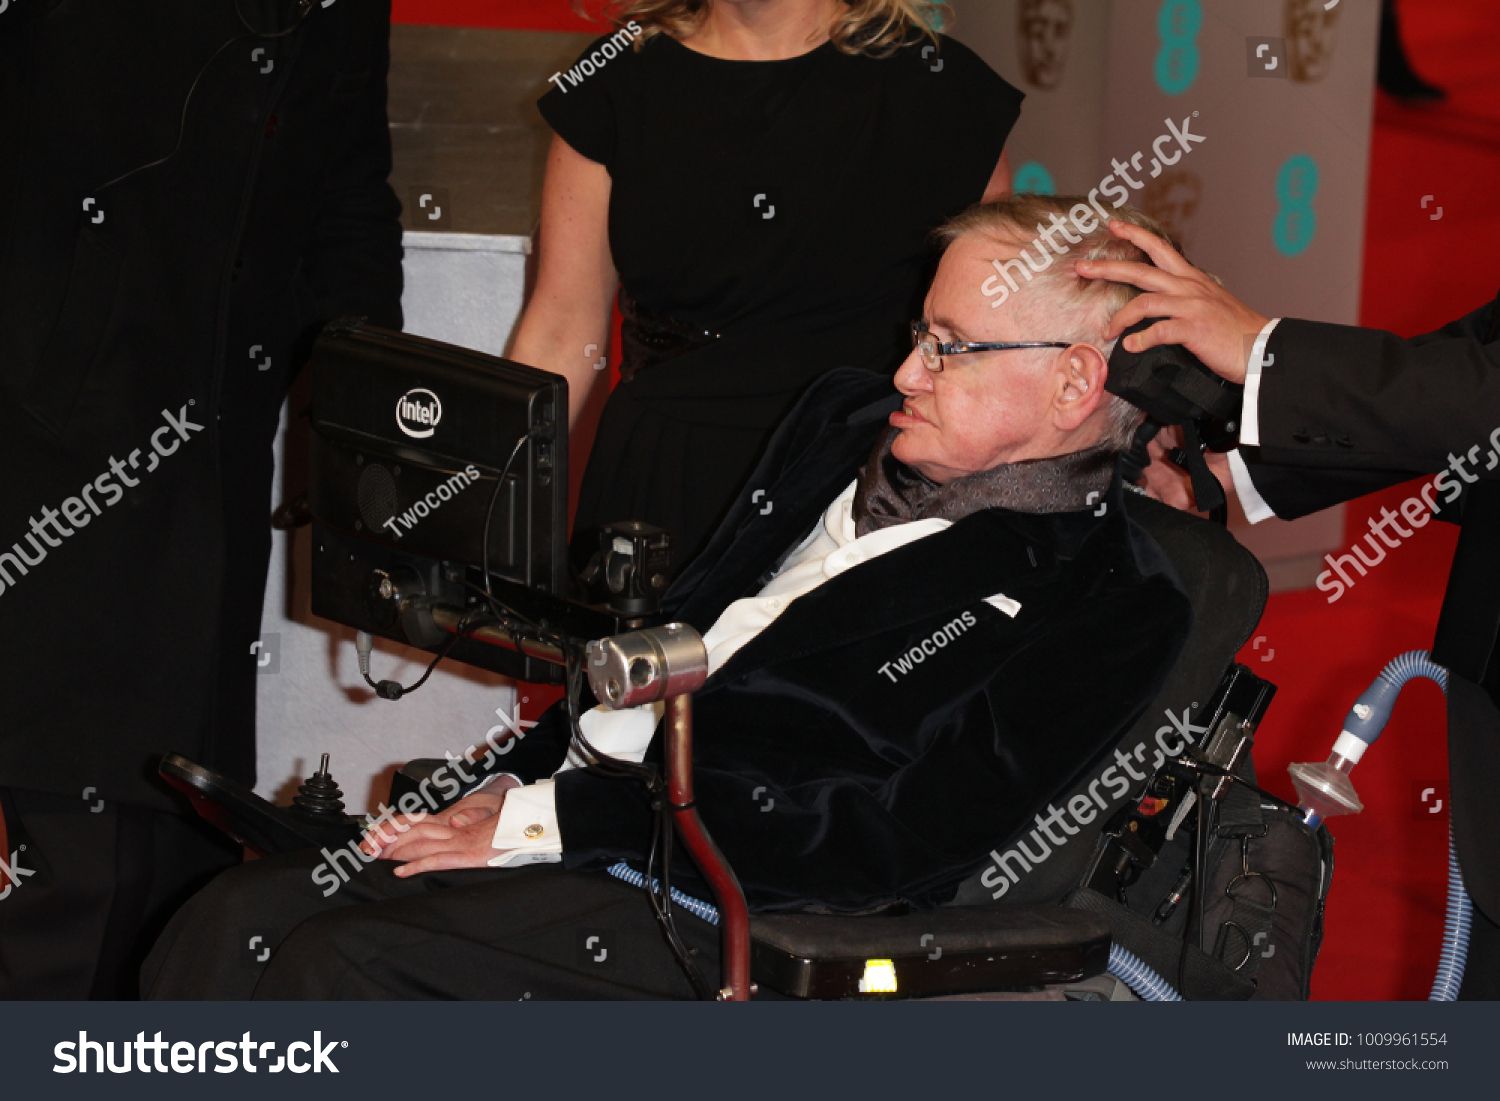 stock-photo-london-feb-stephen-hawking-attends-the-ee-british-academy-film-awards-at-the-royal-opera-1009961554.jpg